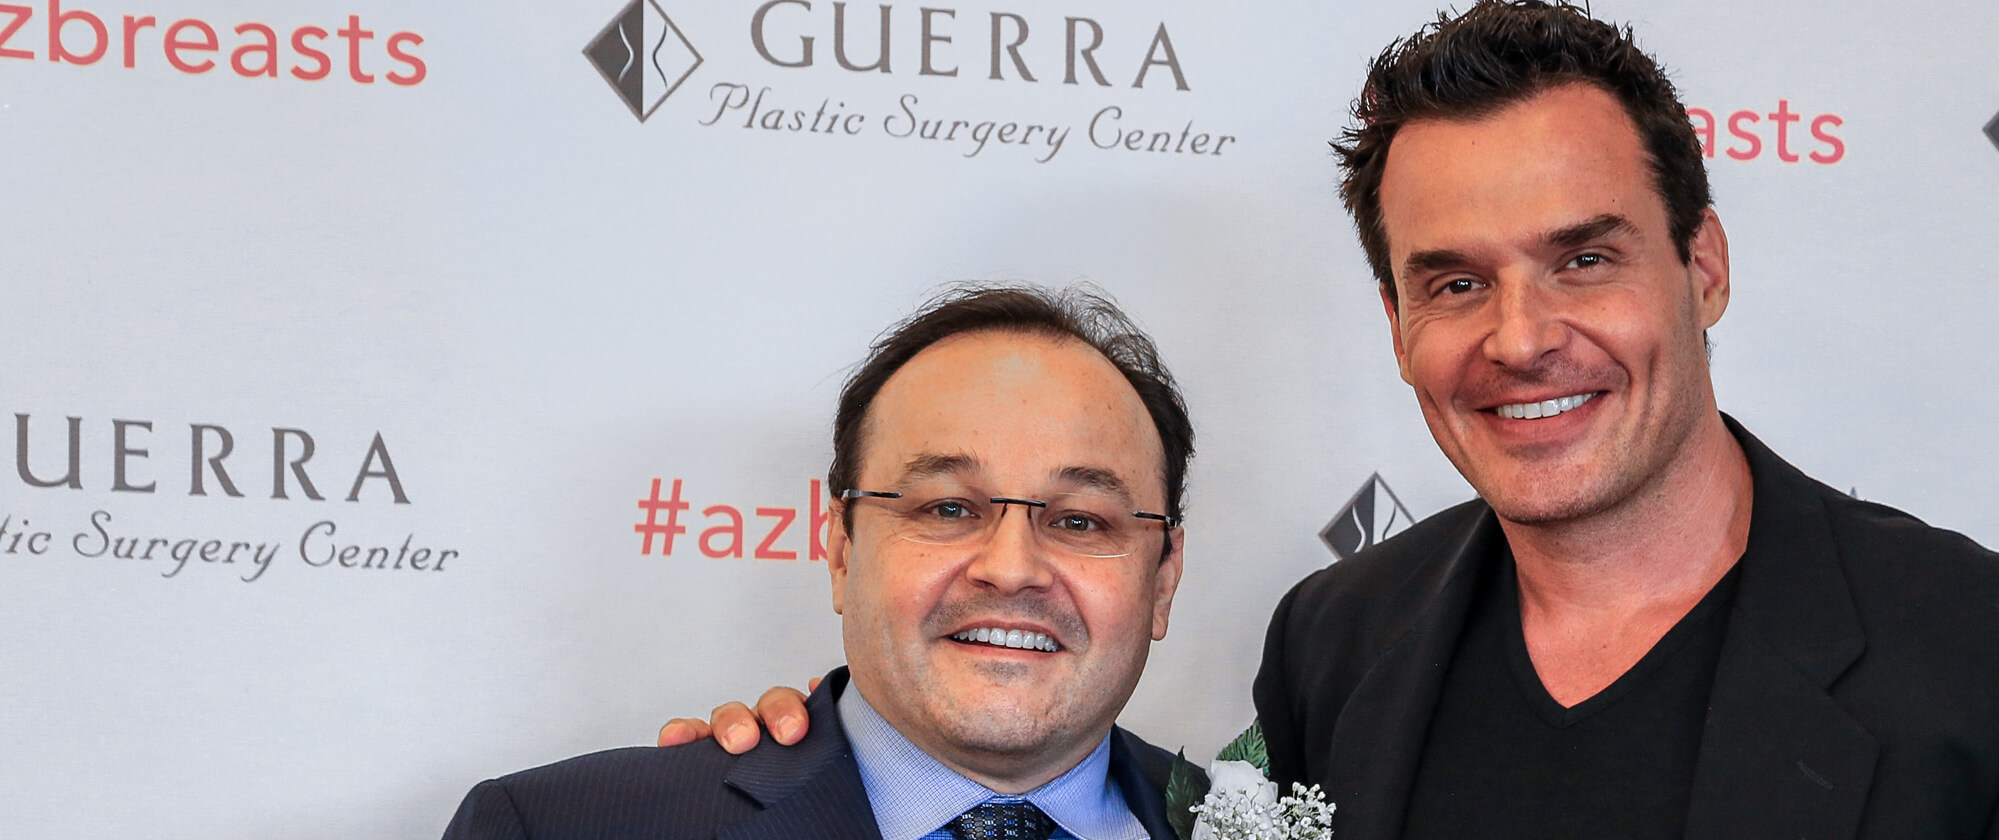 A Successful Open House and Introduction of miraDry® with Antonio Sabato Jr.